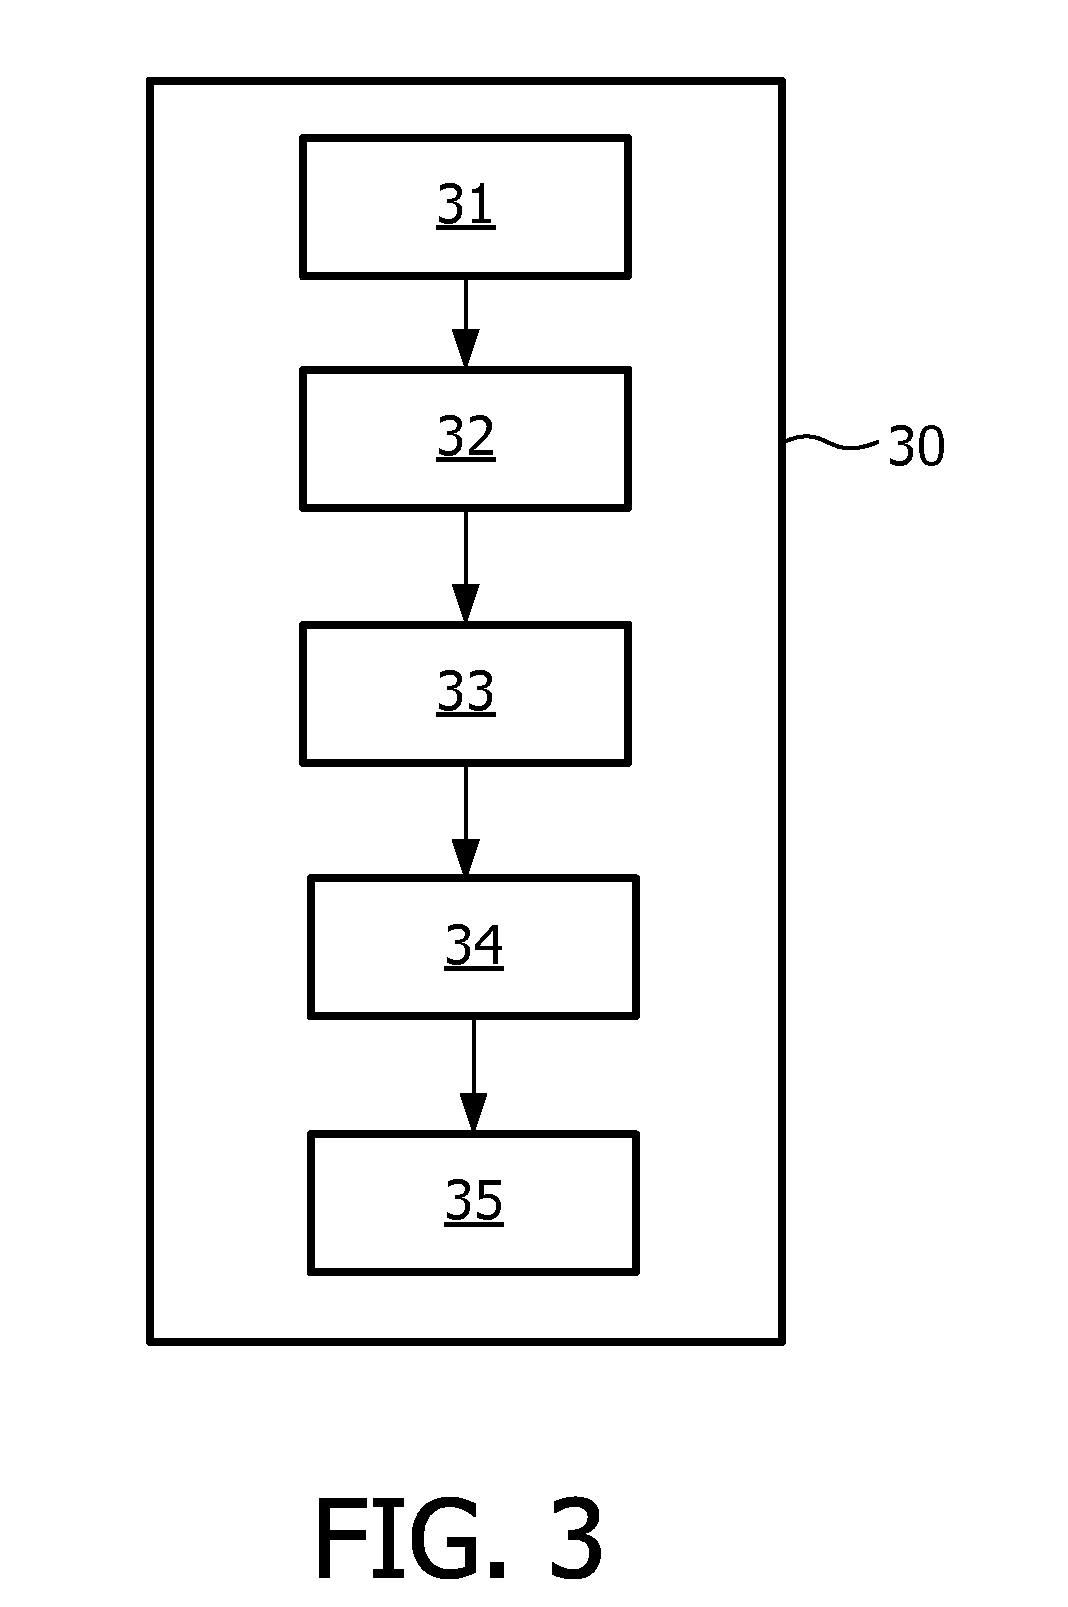 Apparatus, method, computer-readable medium, and use for therapy planning in treatment of a patient